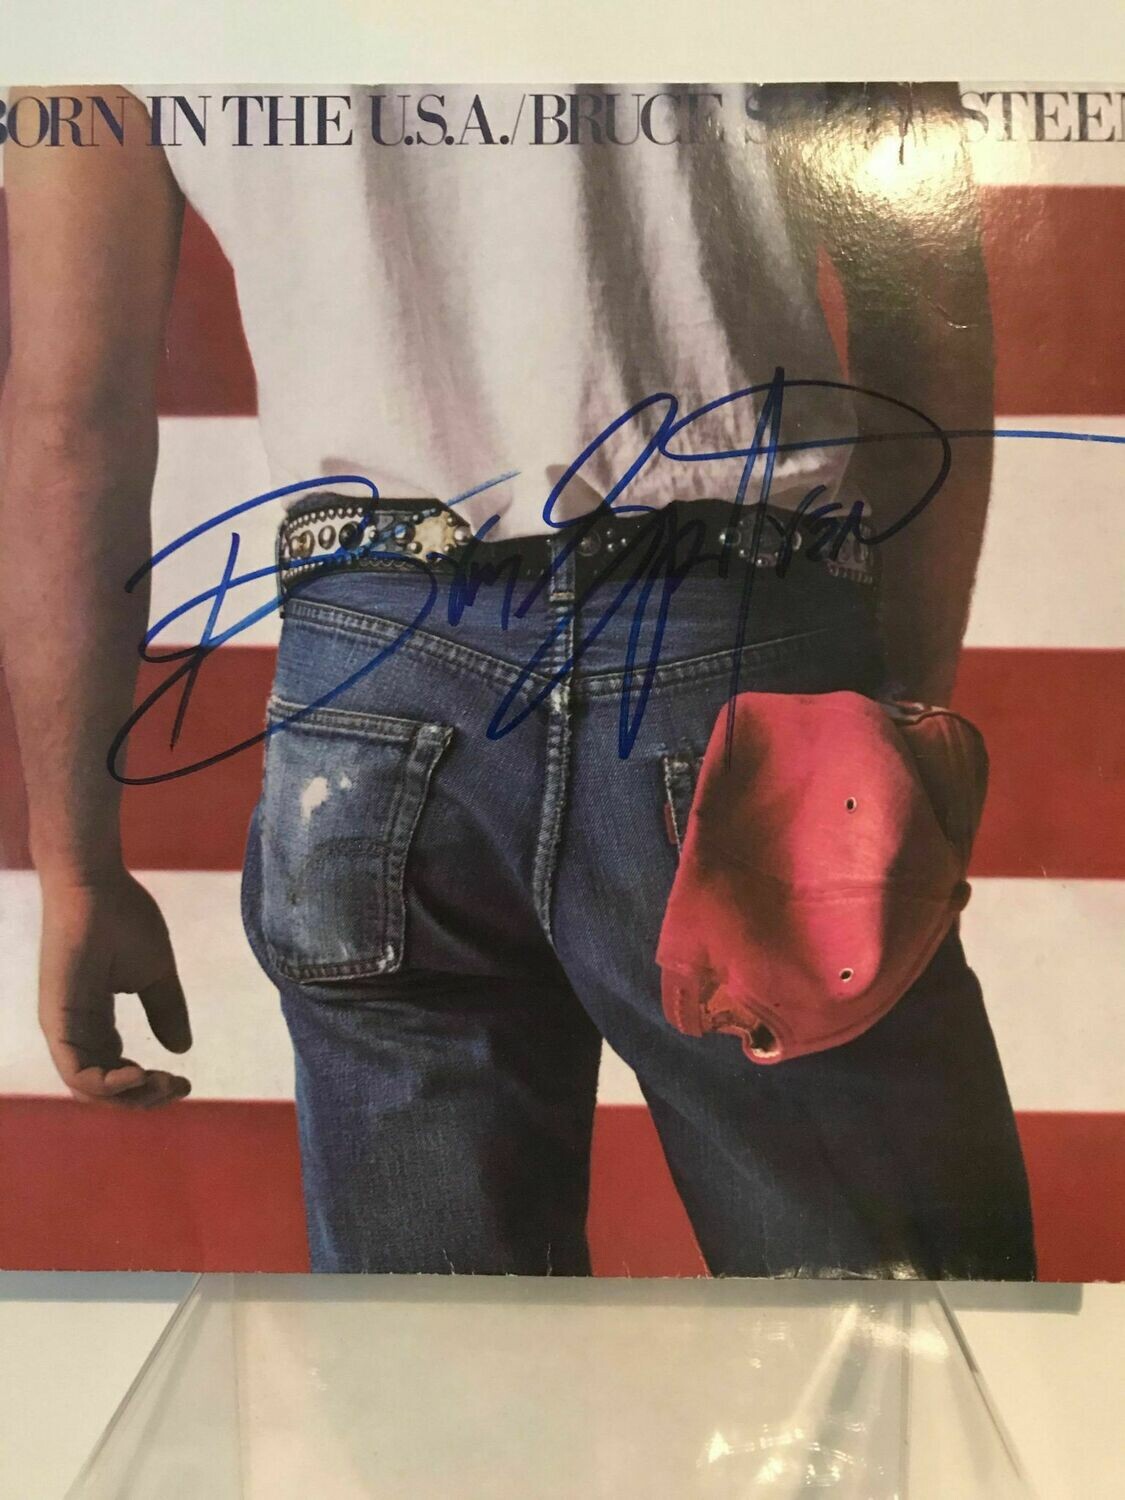 Springsteen signed Record Springsteen Signed Autografato Autograph Bruce Springsteen